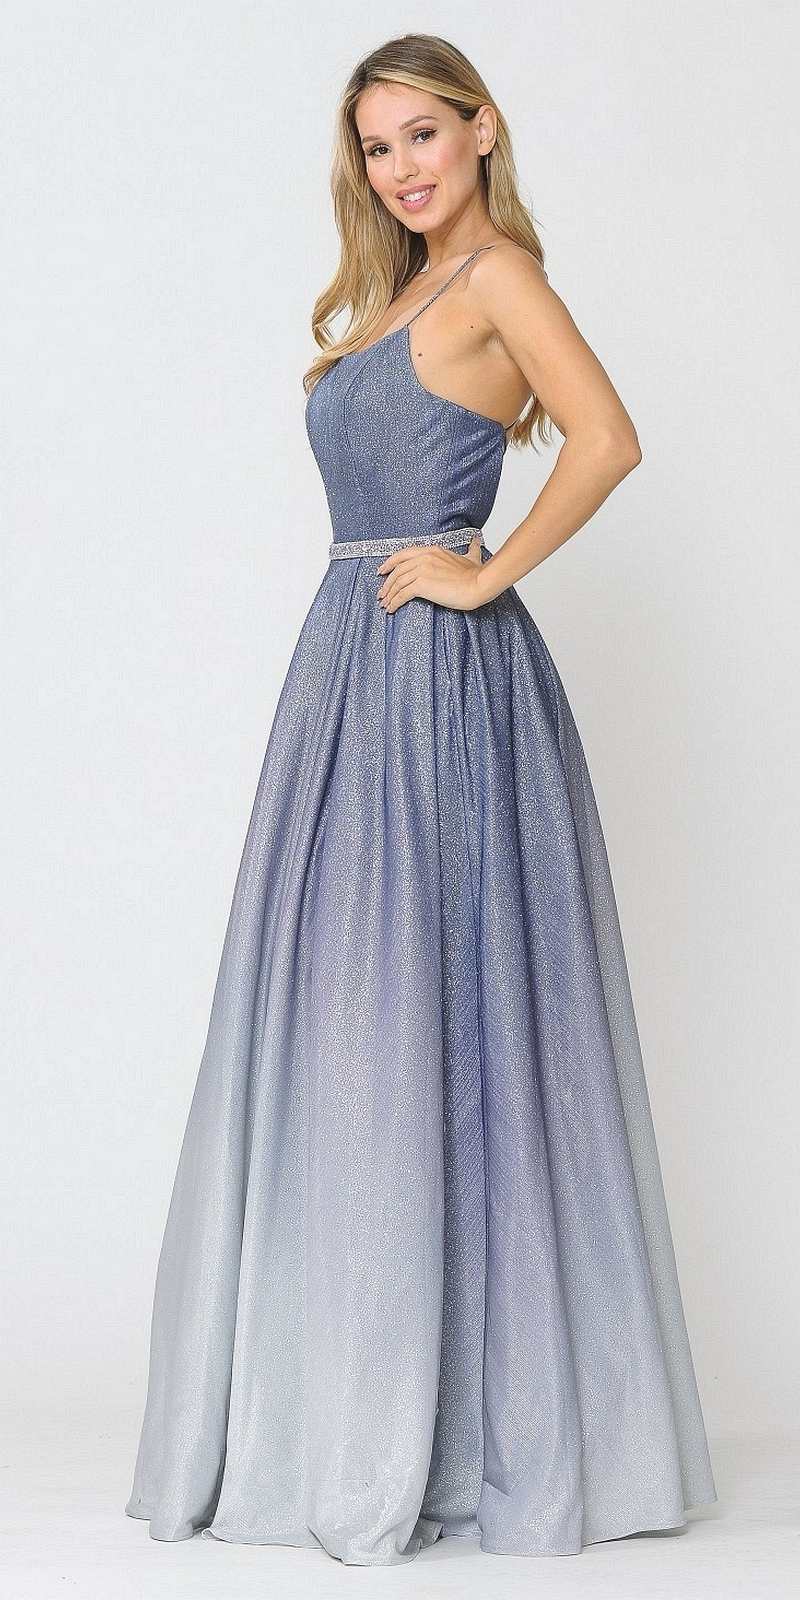 Poly USA 8708 Prom Ball Gown Criss-Cross Back with Pockets Blue